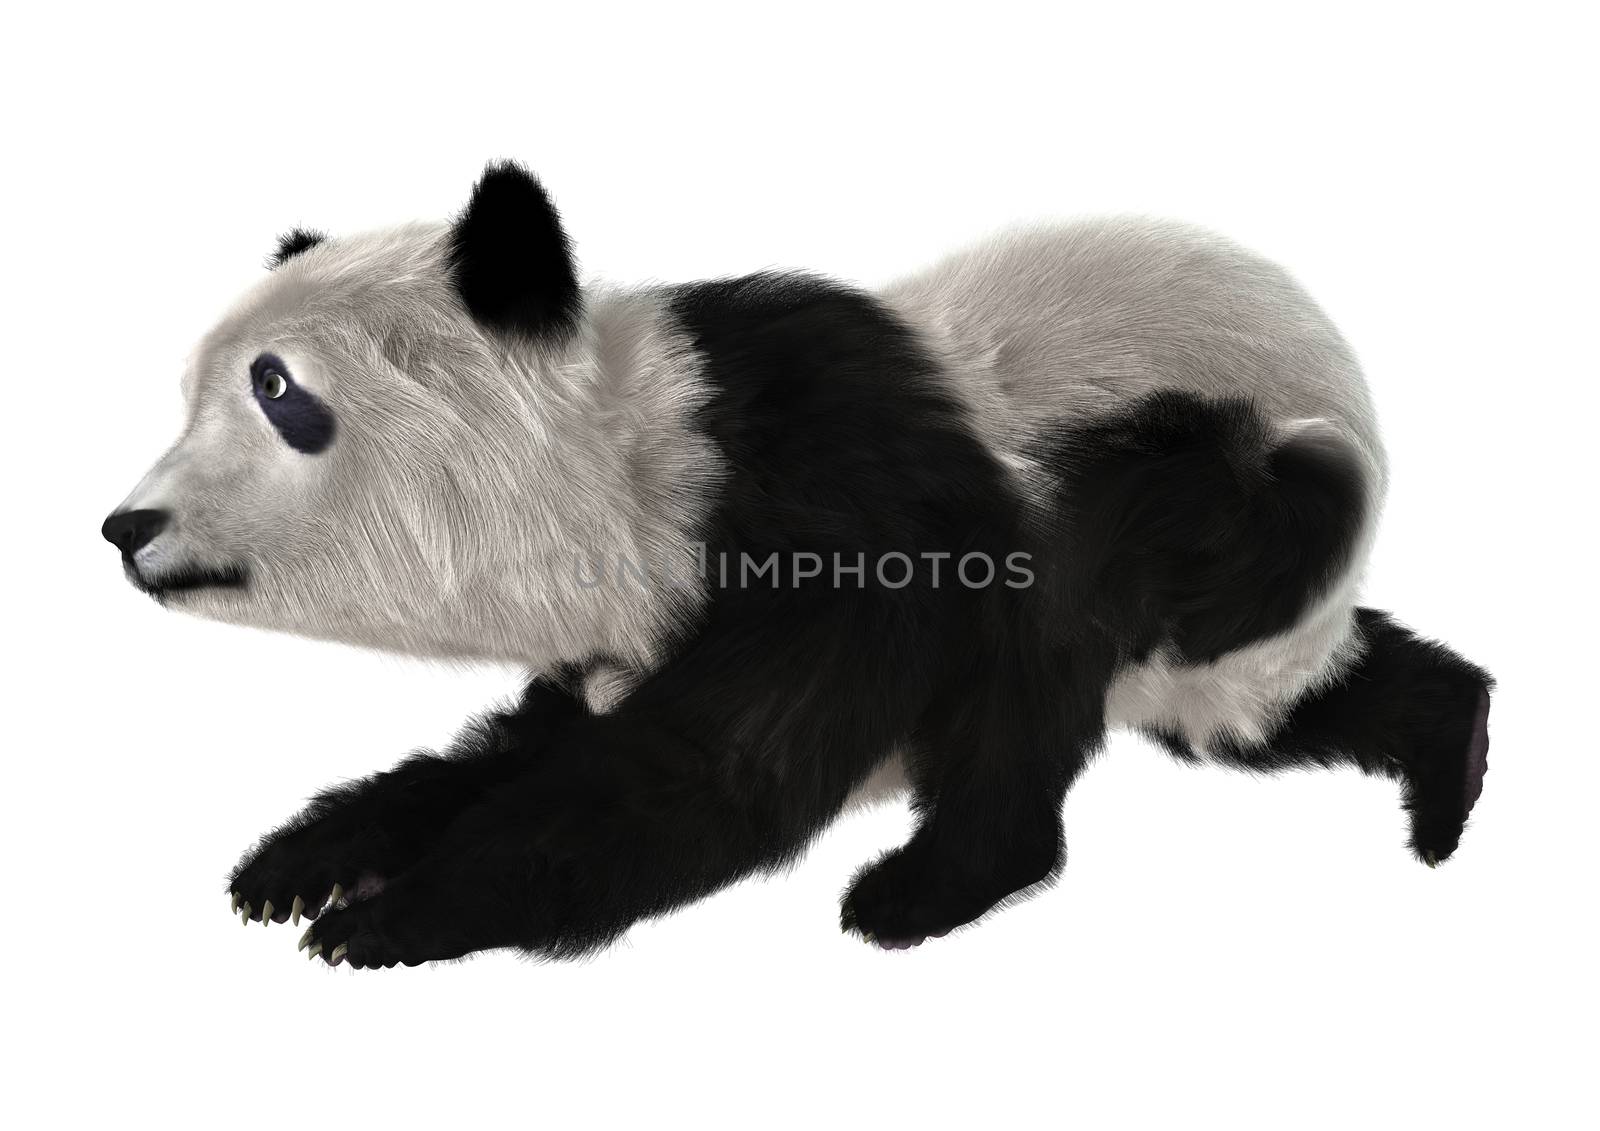 3D digital render of a panda bear cub isolated on white background